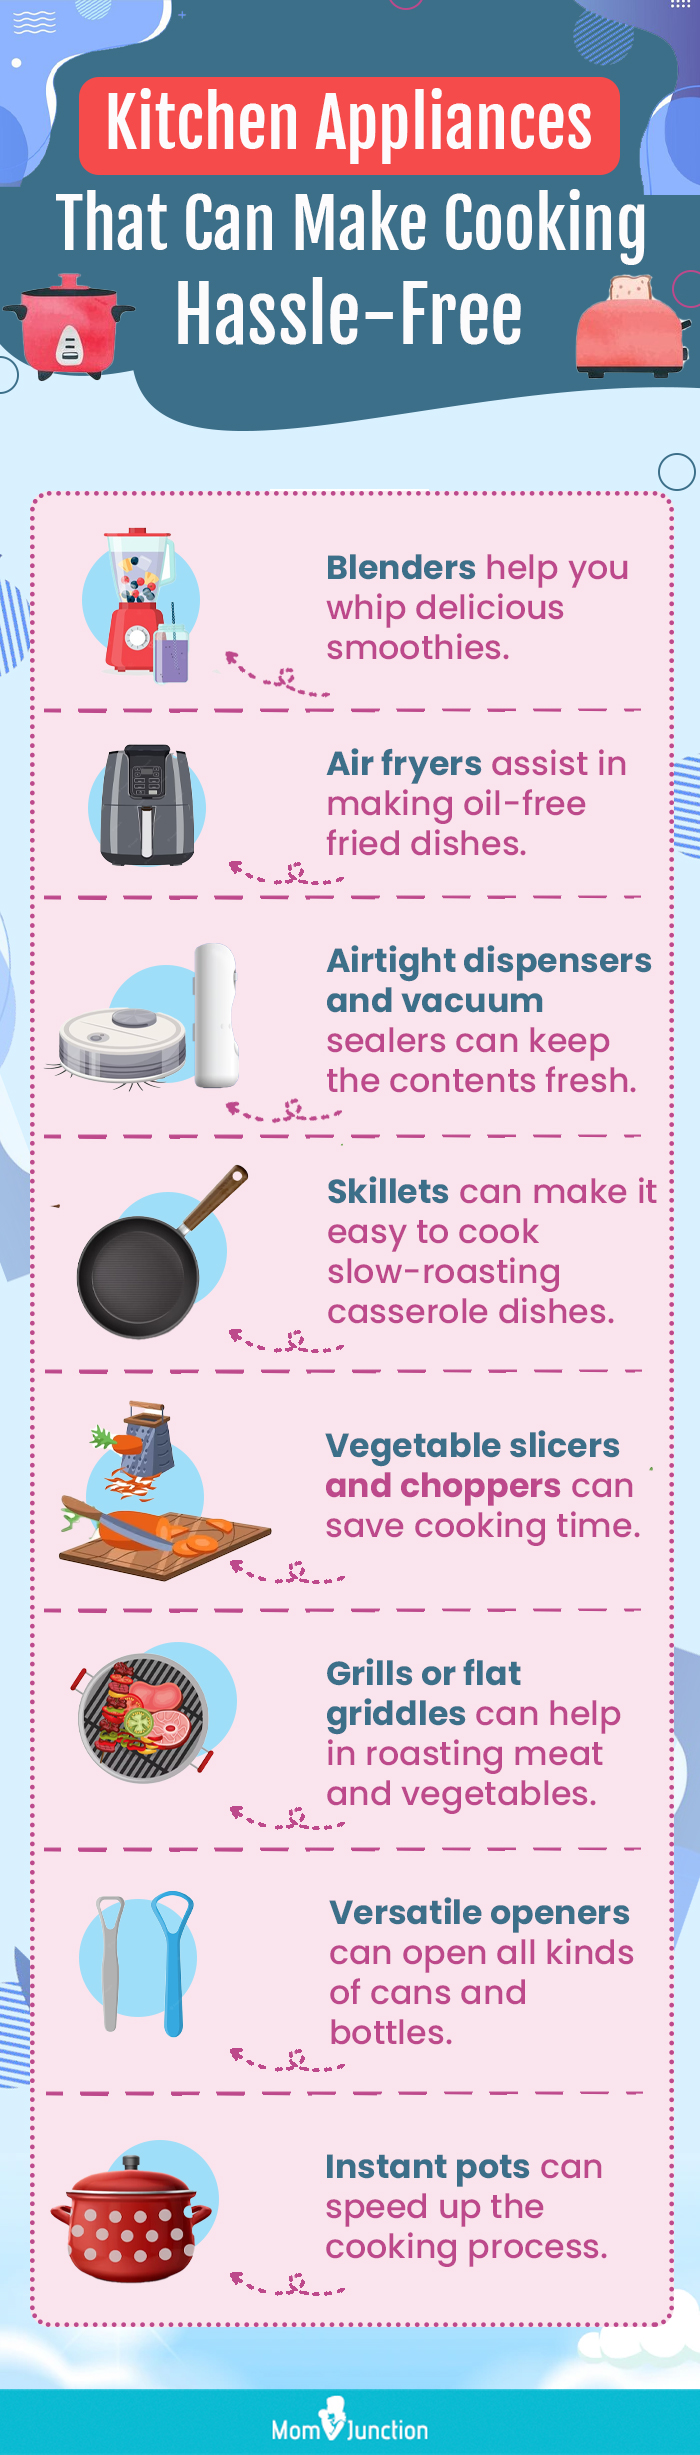 Kitchen Appliances That Can Make Cooking Hassle-Free(infographic)